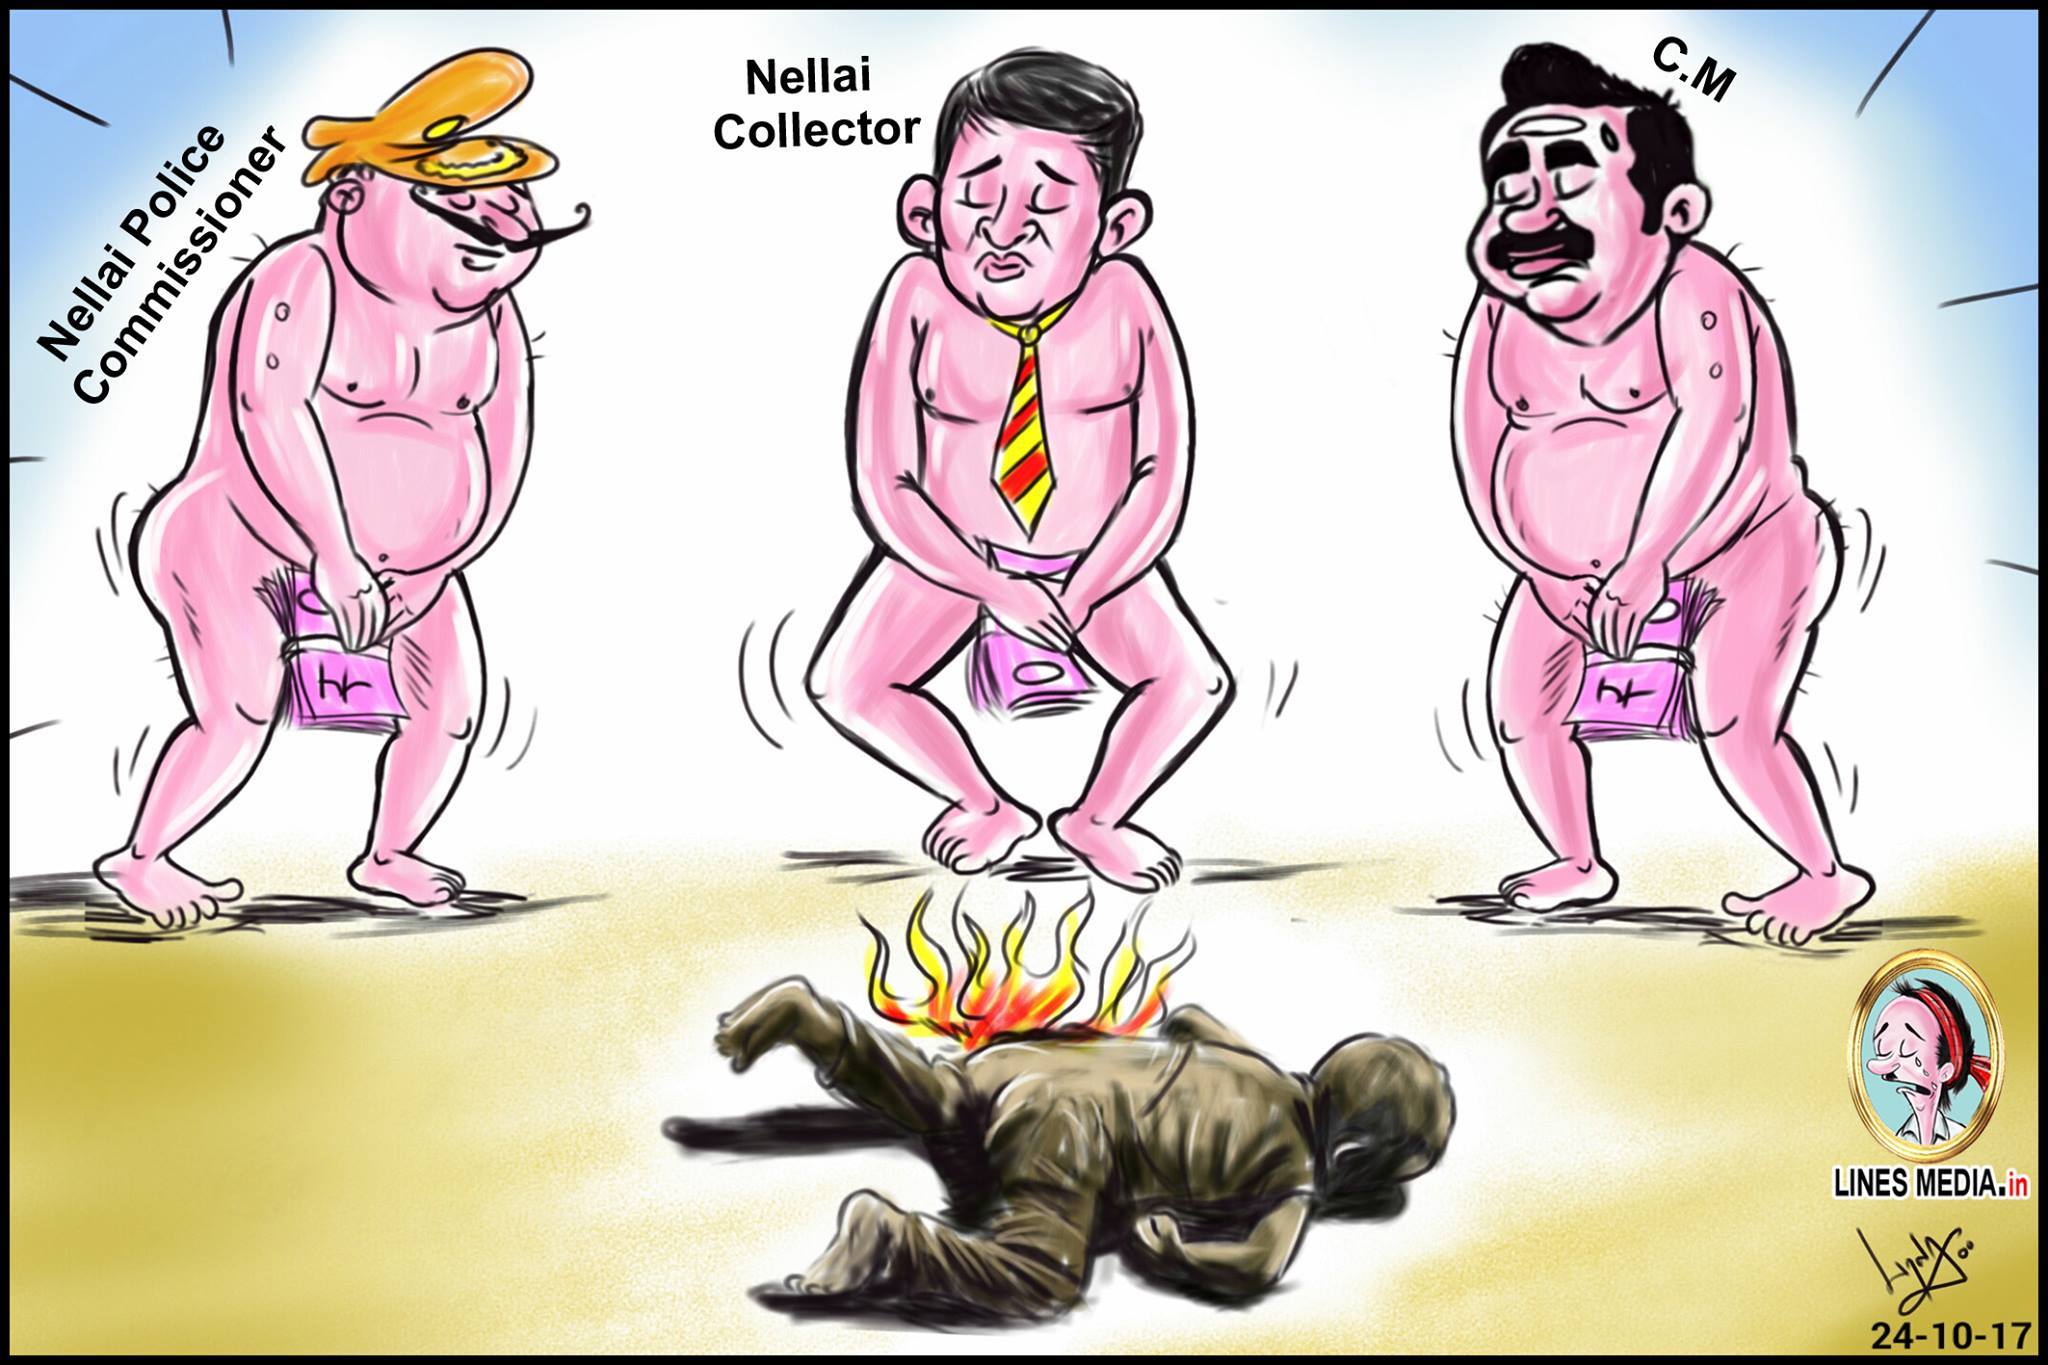 against of tamilnadu cm a cartoonist made cartoon then he is arrested